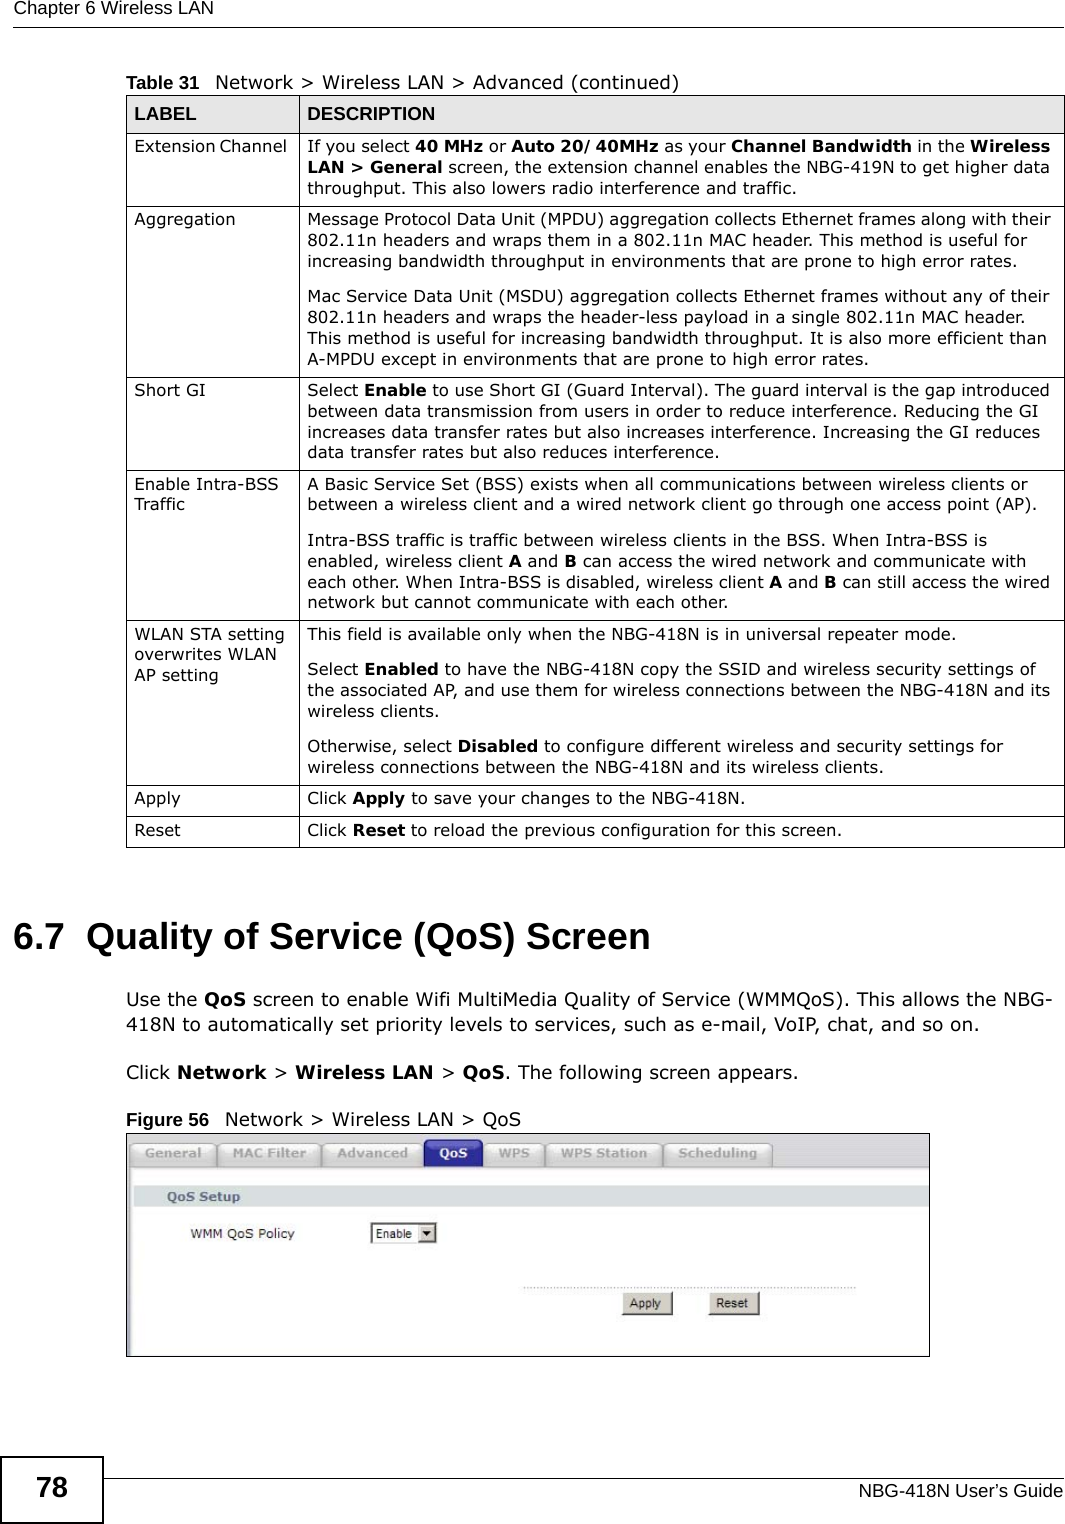 Chapter 6 Wireless LANNBG-418N User’s Guide786.7  Quality of Service (QoS) ScreenUse the QoS screen to enable Wifi MultiMedia Quality of Service (WMMQoS). This allows the NBG-418N to automatically set priority levels to services, such as e-mail, VoIP, chat, and so on.Click Network &gt; Wireless LAN &gt; QoS. The following screen appears.Figure 56   Network &gt; Wireless LAN &gt; QoS Extension Channel  If you select 40 MHz or Auto 20/40MHz as your Channel Bandwidth in the Wireless LAN &gt; General screen, the extension channel enables the NBG-419N to get higher data throughput. This also lowers radio interference and traffic.Aggregation Message Protocol Data Unit (MPDU) aggregation collects Ethernet frames along with their 802.11n headers and wraps them in a 802.11n MAC header. This method is useful for increasing bandwidth throughput in environments that are prone to high error rates.Mac Service Data Unit (MSDU) aggregation collects Ethernet frames without any of their 802.11n headers and wraps the header-less payload in a single 802.11n MAC header. This method is useful for increasing bandwidth throughput. It is also more efficient than A-MPDU except in environments that are prone to high error rates.Short GI Select Enable to use Short GI (Guard Interval). The guard interval is the gap introduced between data transmission from users in order to reduce interference. Reducing the GI increases data transfer rates but also increases interference. Increasing the GI reduces data transfer rates but also reduces interference.Enable Intra-BSS TrafficA Basic Service Set (BSS) exists when all communications between wireless clients or between a wireless client and a wired network client go through one access point (AP). Intra-BSS traffic is traffic between wireless clients in the BSS. When Intra-BSS is enabled, wireless client A and B can access the wired network and communicate with each other. When Intra-BSS is disabled, wireless client A and B can still access the wired network but cannot communicate with each other.WLAN STA setting overwrites WLAN AP settingThis field is available only when the NBG-418N is in universal repeater mode.Select Enabled to have the NBG-418N copy the SSID and wireless security settings of the associated AP, and use them for wireless connections between the NBG-418N and its wireless clients.Otherwise, select Disabled to configure different wireless and security settings for wireless connections between the NBG-418N and its wireless clients.Apply Click Apply to save your changes to the NBG-418N.Reset Click Reset to reload the previous configuration for this screen.Table 31   Network &gt; Wireless LAN &gt; Advanced (continued)LABEL DESCRIPTION